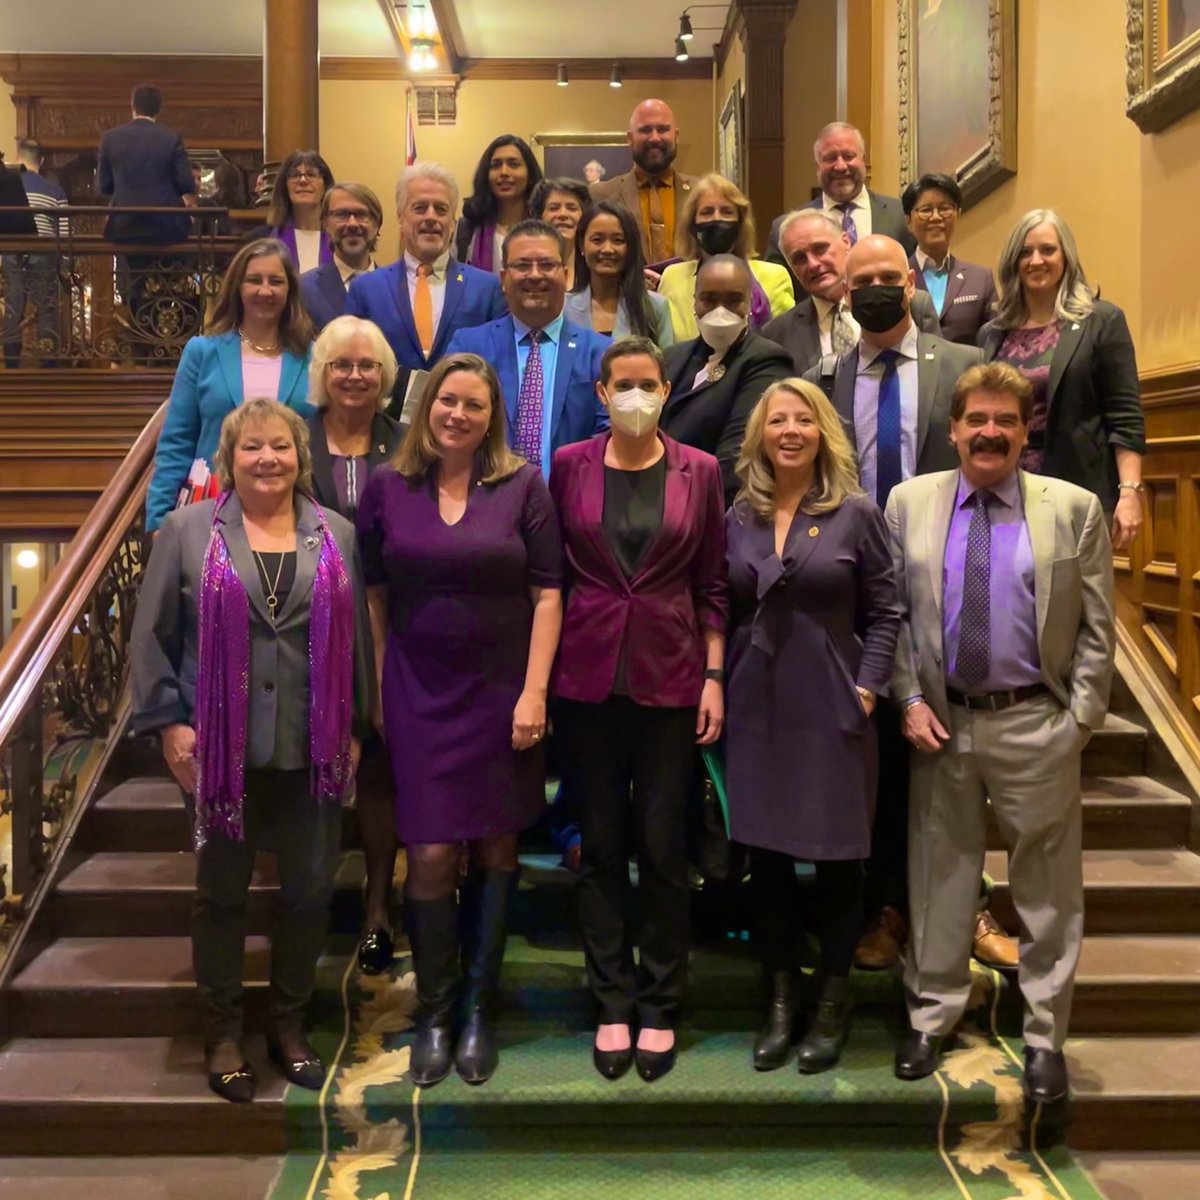 The @OntarioNDP caucus is wearing purple today in solidarity with @CUPEOntario @osbcucscso education workers. We know that #39kIsNotEnough and we’re going to continue pressuring this government to respect education workers by offering them a fair deal. #onted #onpoli